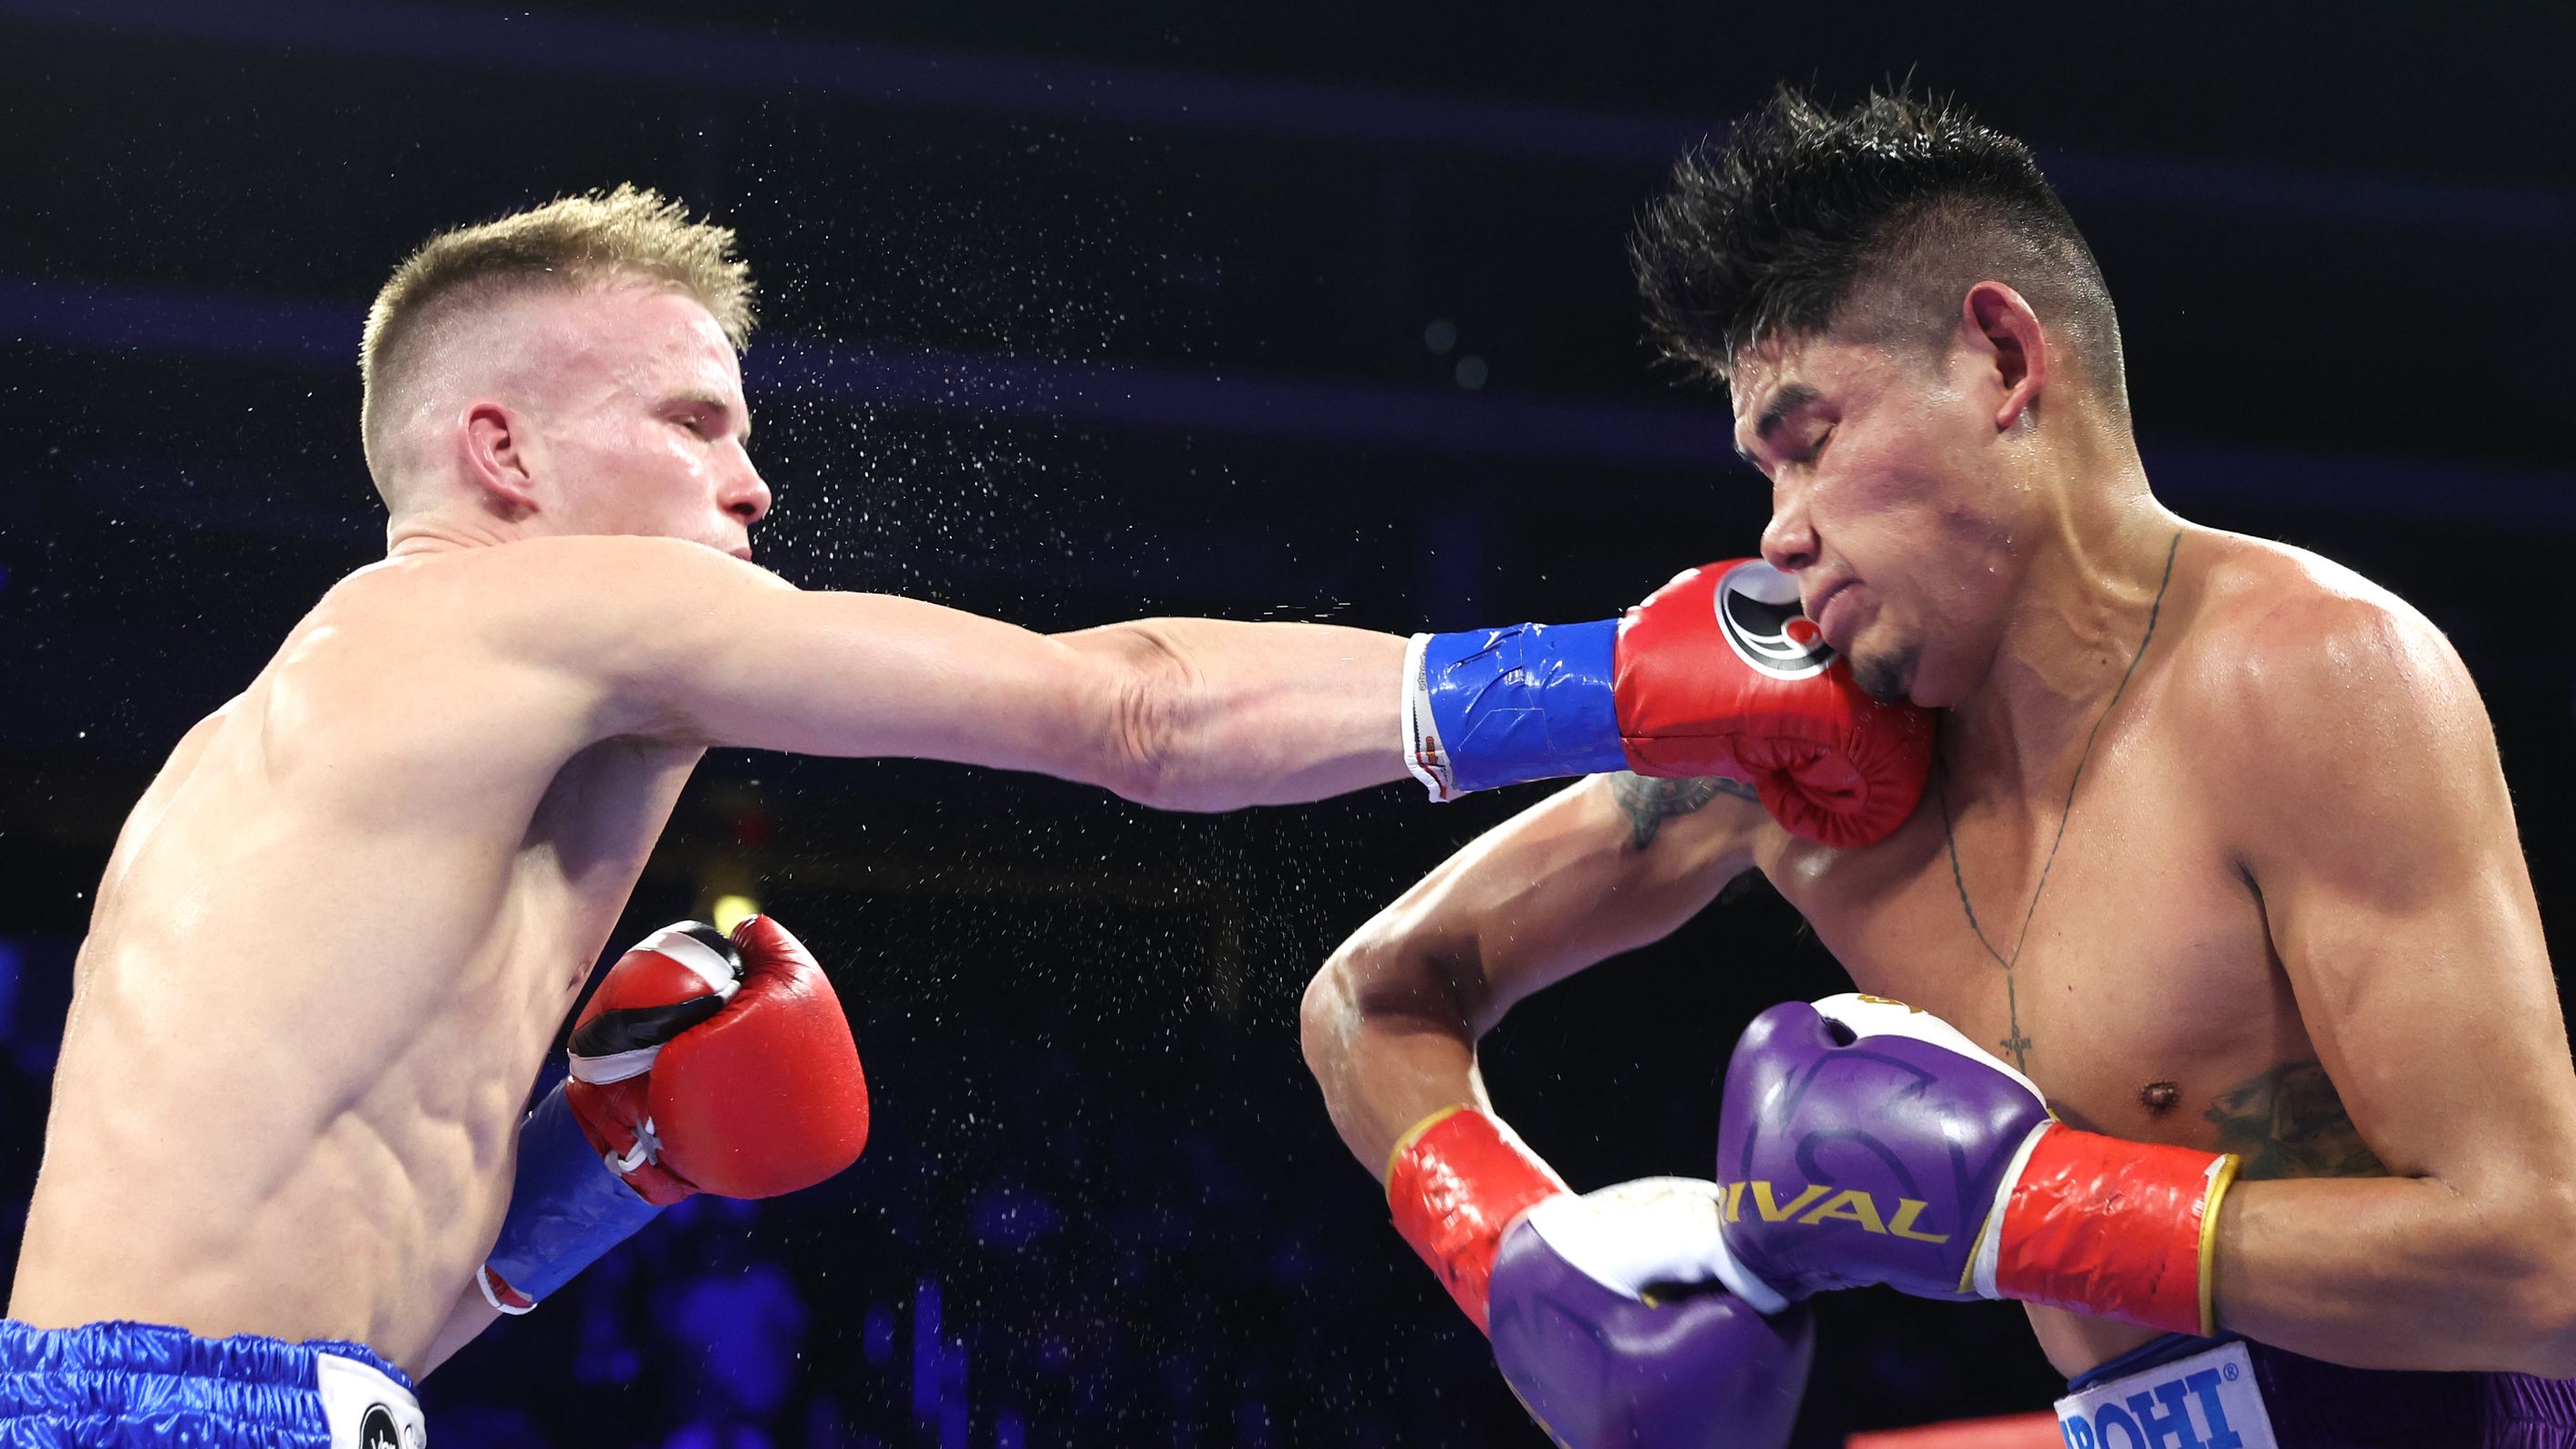 Liam Wilson (L) and Emanuel Navarrete (R) exchange punches during their vacant WBO junior lightweight championship fight at Desert Diamond Arena on February 03, 2033 in Glendale, Arizona. (Photo by Mikey Williams/Top Rank Inc via Getty Images)